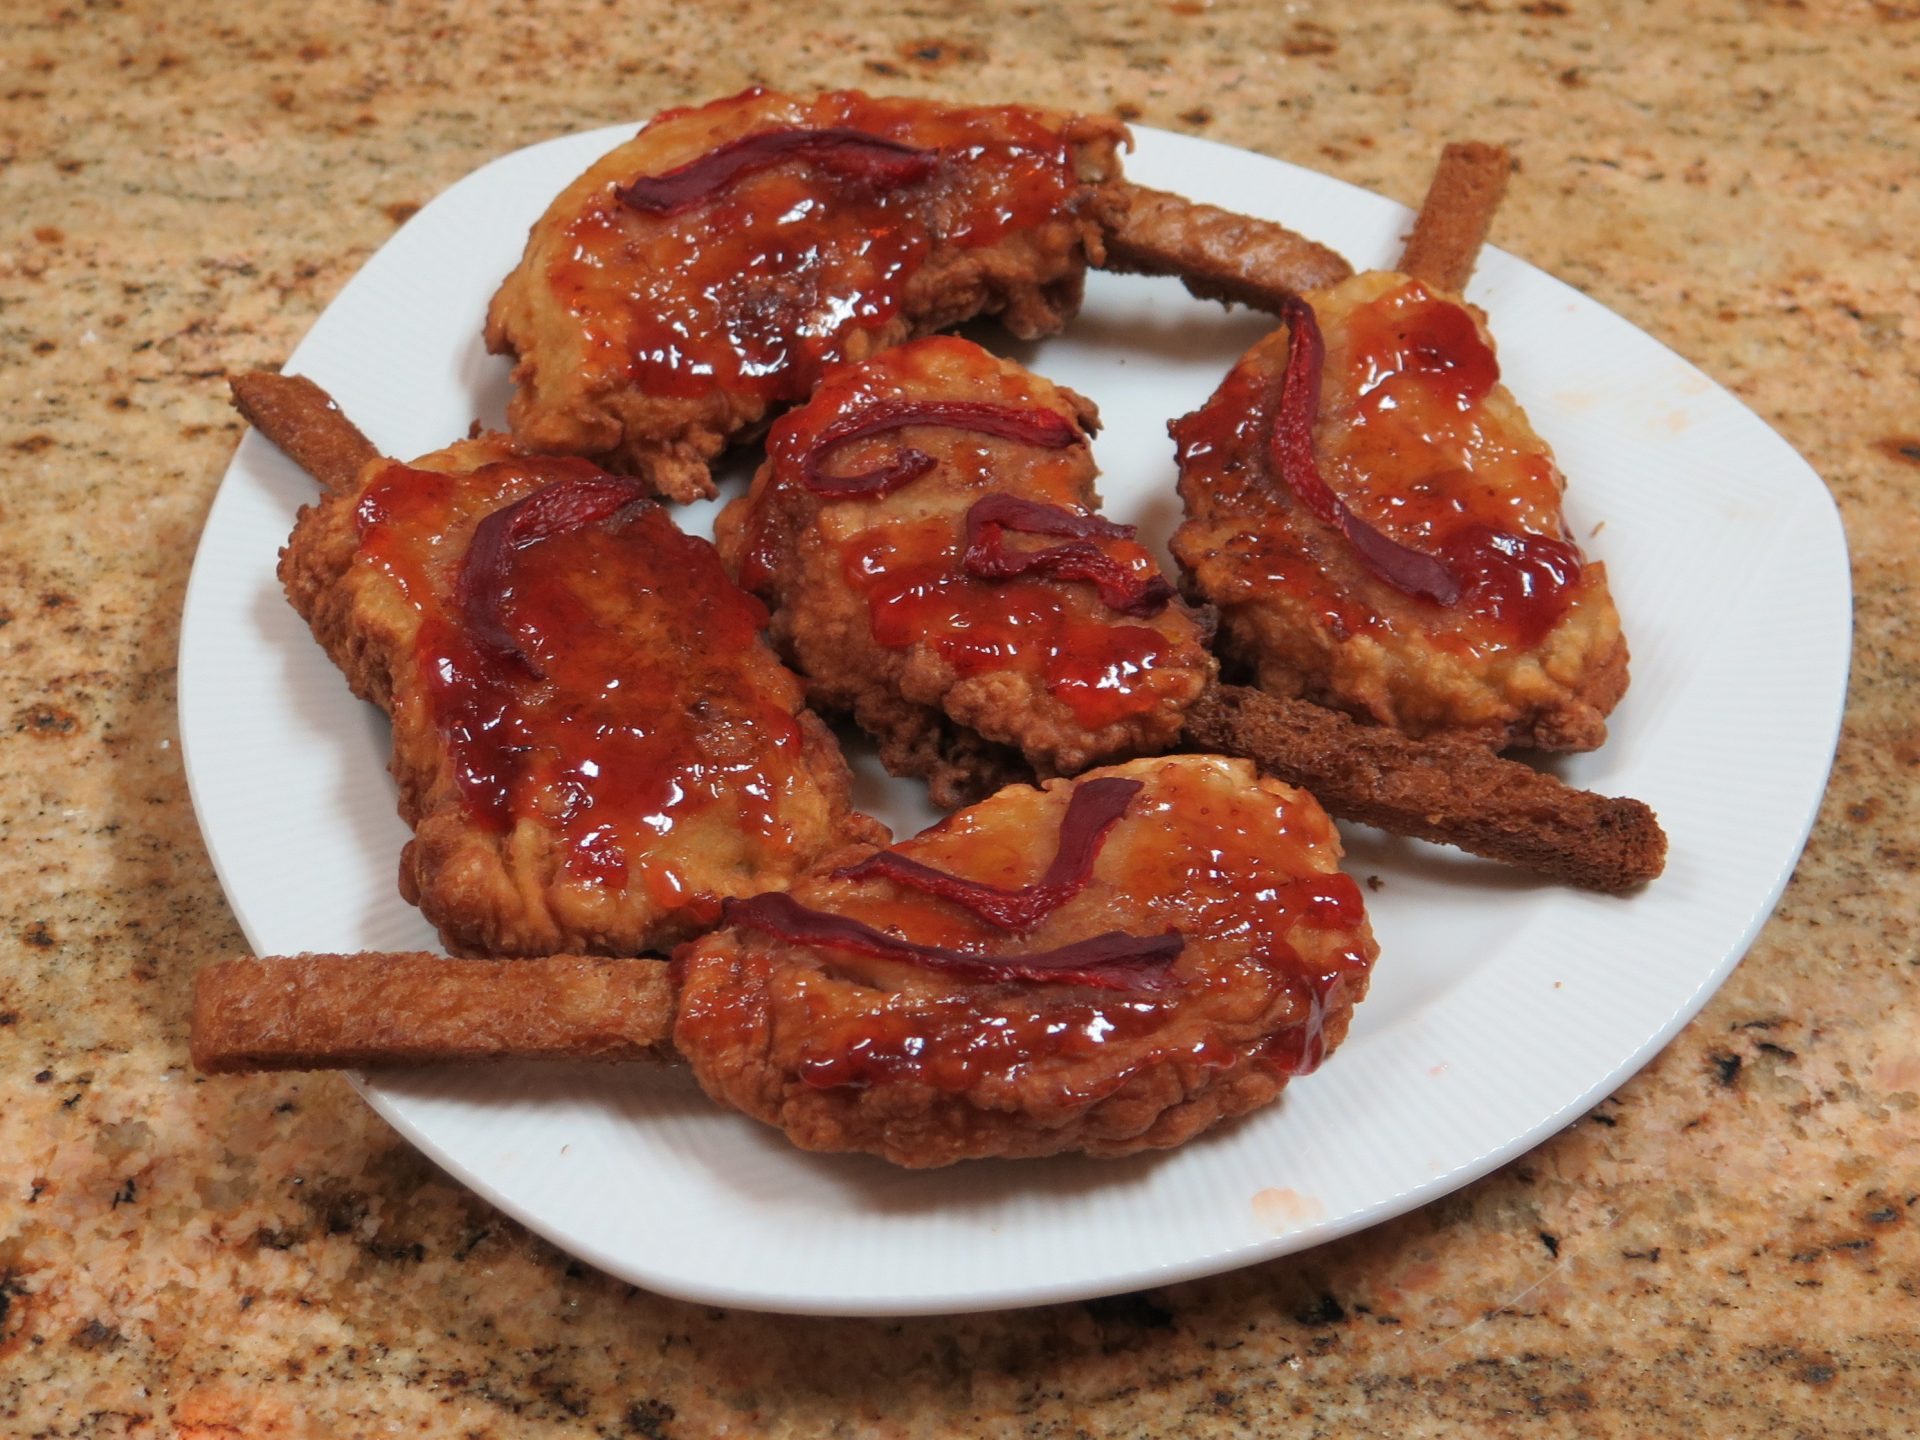 Among the family recipes handed down to Milgrom is chuletas, the Spanish word for pork chops. Made from bread and milk, the dish is basically French toast that's been fried in the shape of a pork chop and dressed up with tomato jam and pimentos. Crypto-Jews would have eaten it so that their Catholic neighbors and employees would not suspect they still kept their faith in secret.